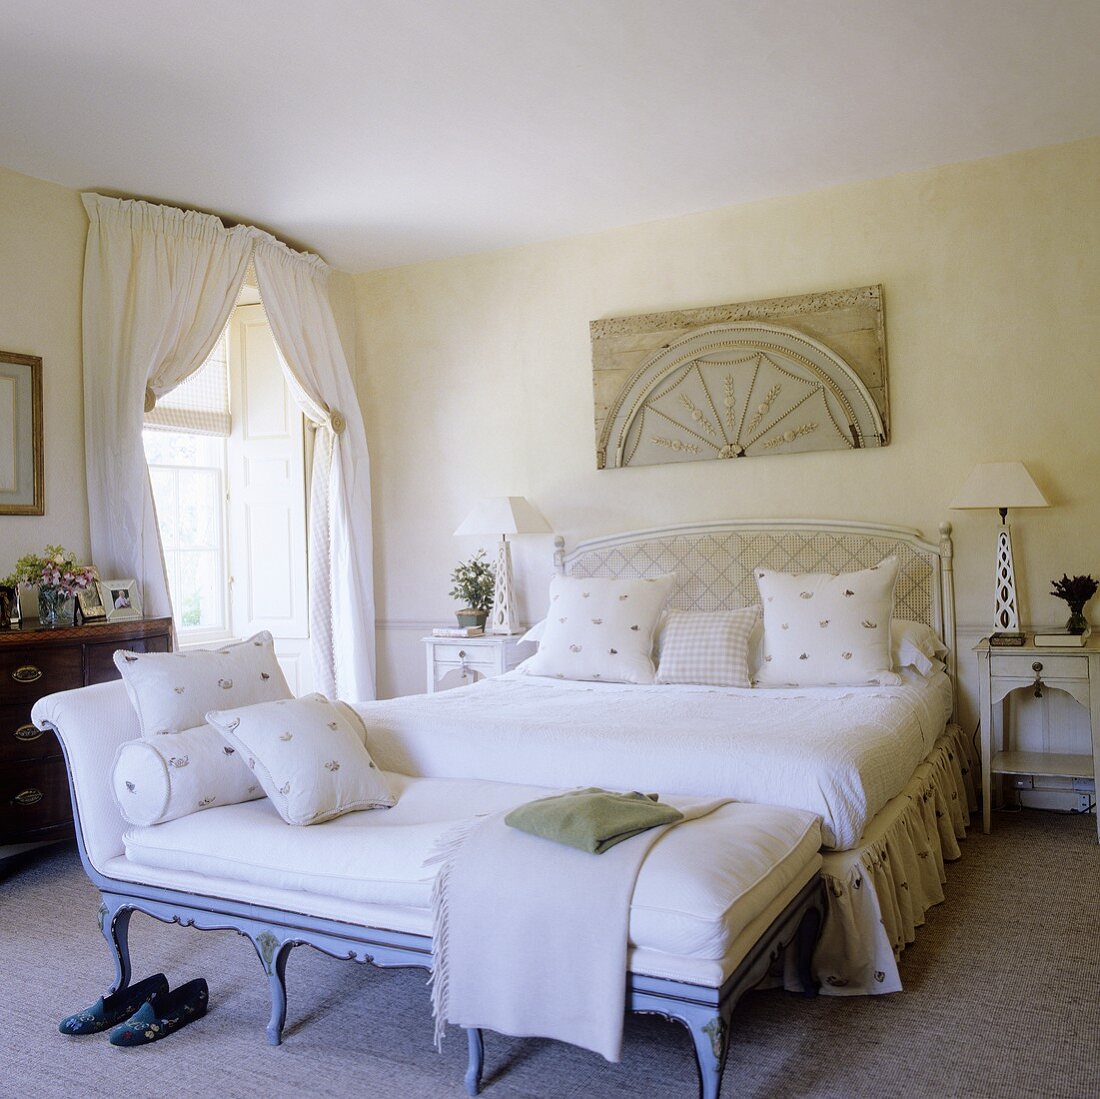 A light coloured bedroom in a country house with a chaise lounge in front of a double bed with white bedclothes